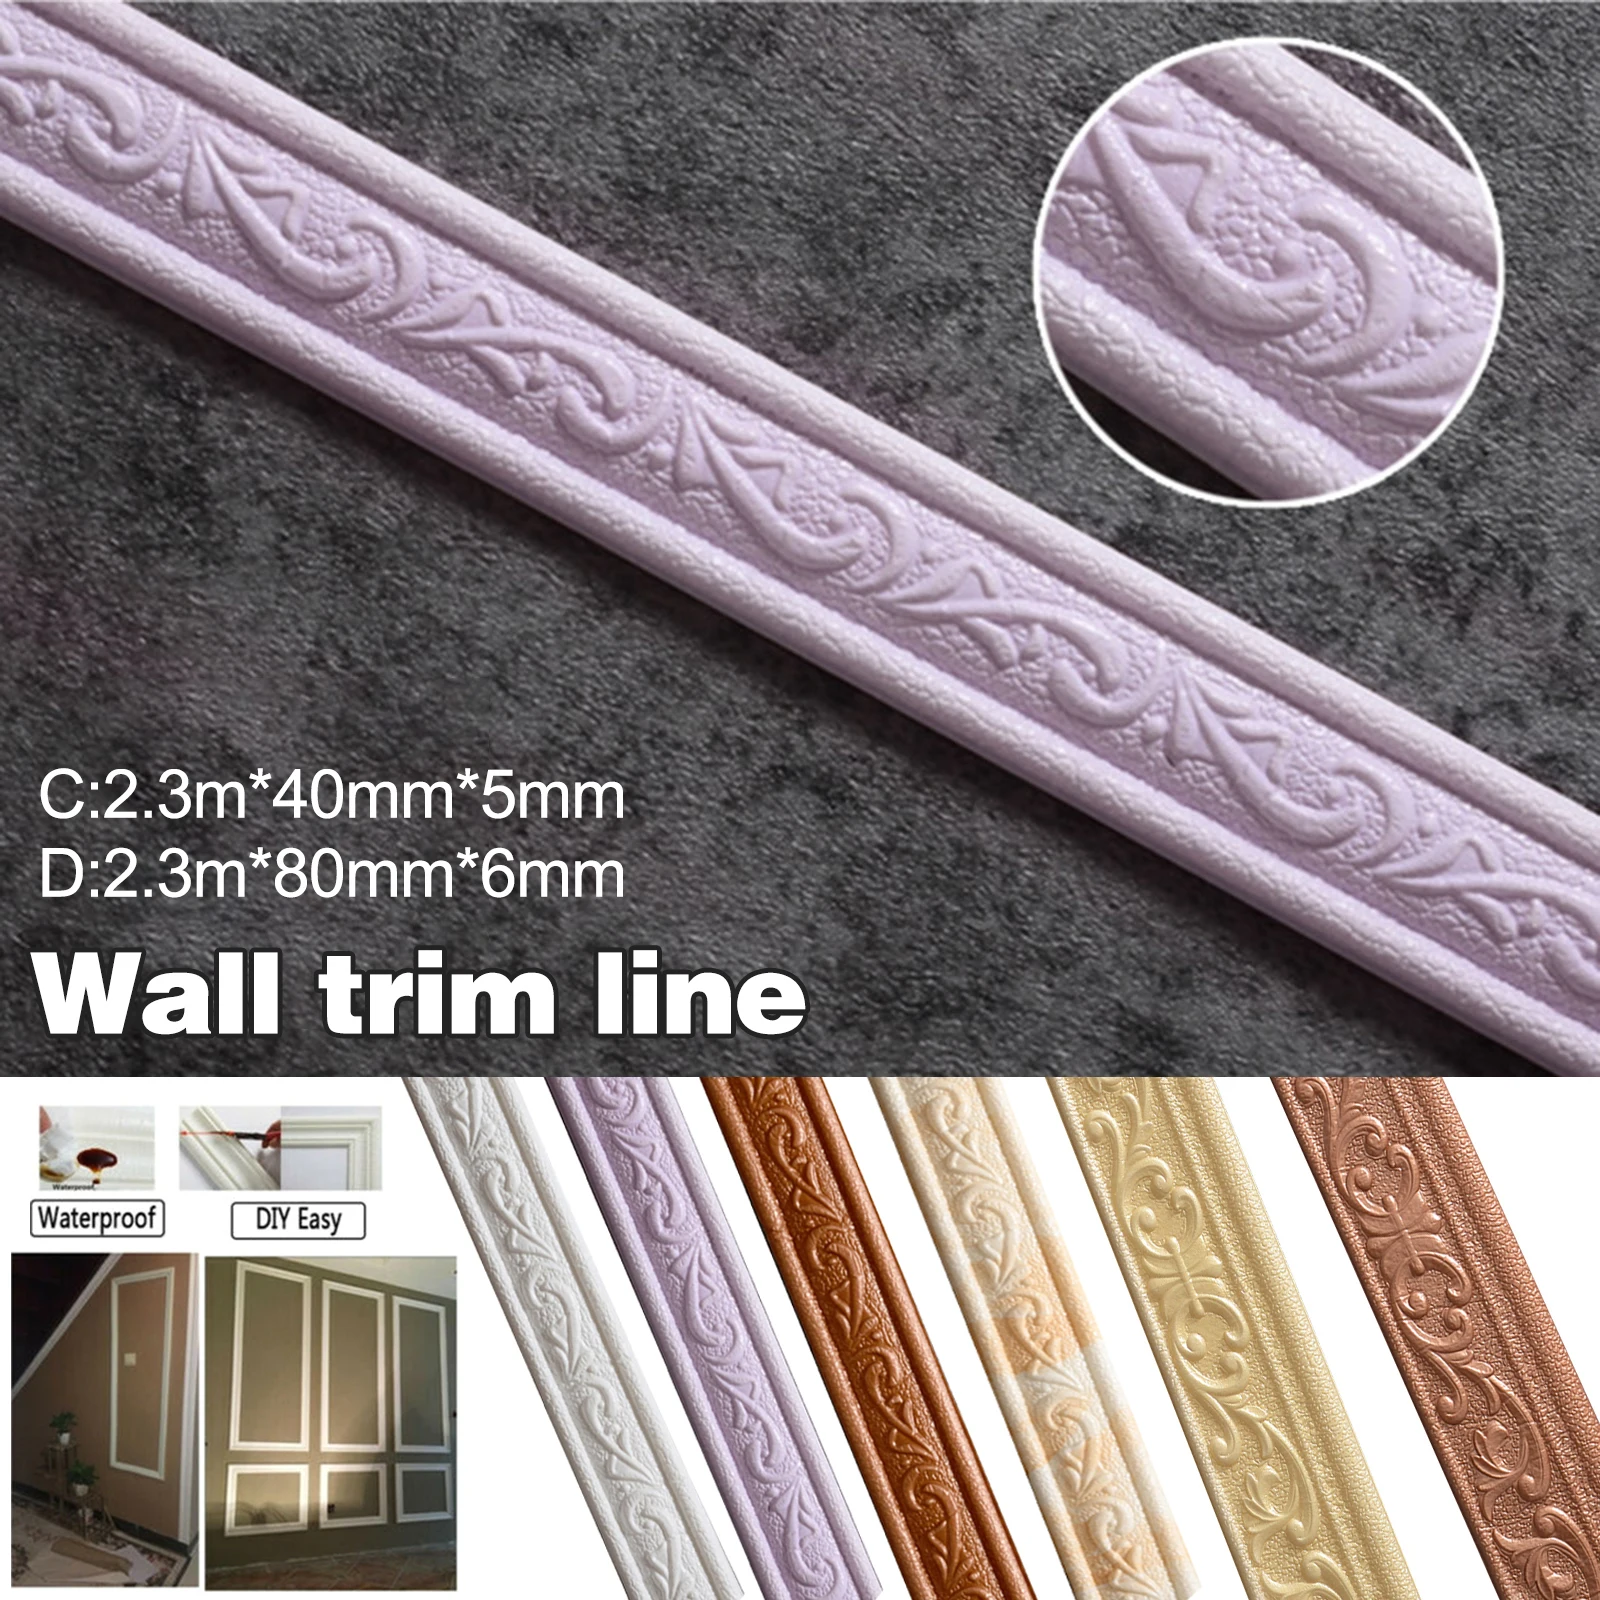 wall stickers painting Hot 3D Pattern Sticker Wall Trim Line Skirting Border Decoration Self Adhesive Household For Living Room DIY Background Sticker best Wall Stickers